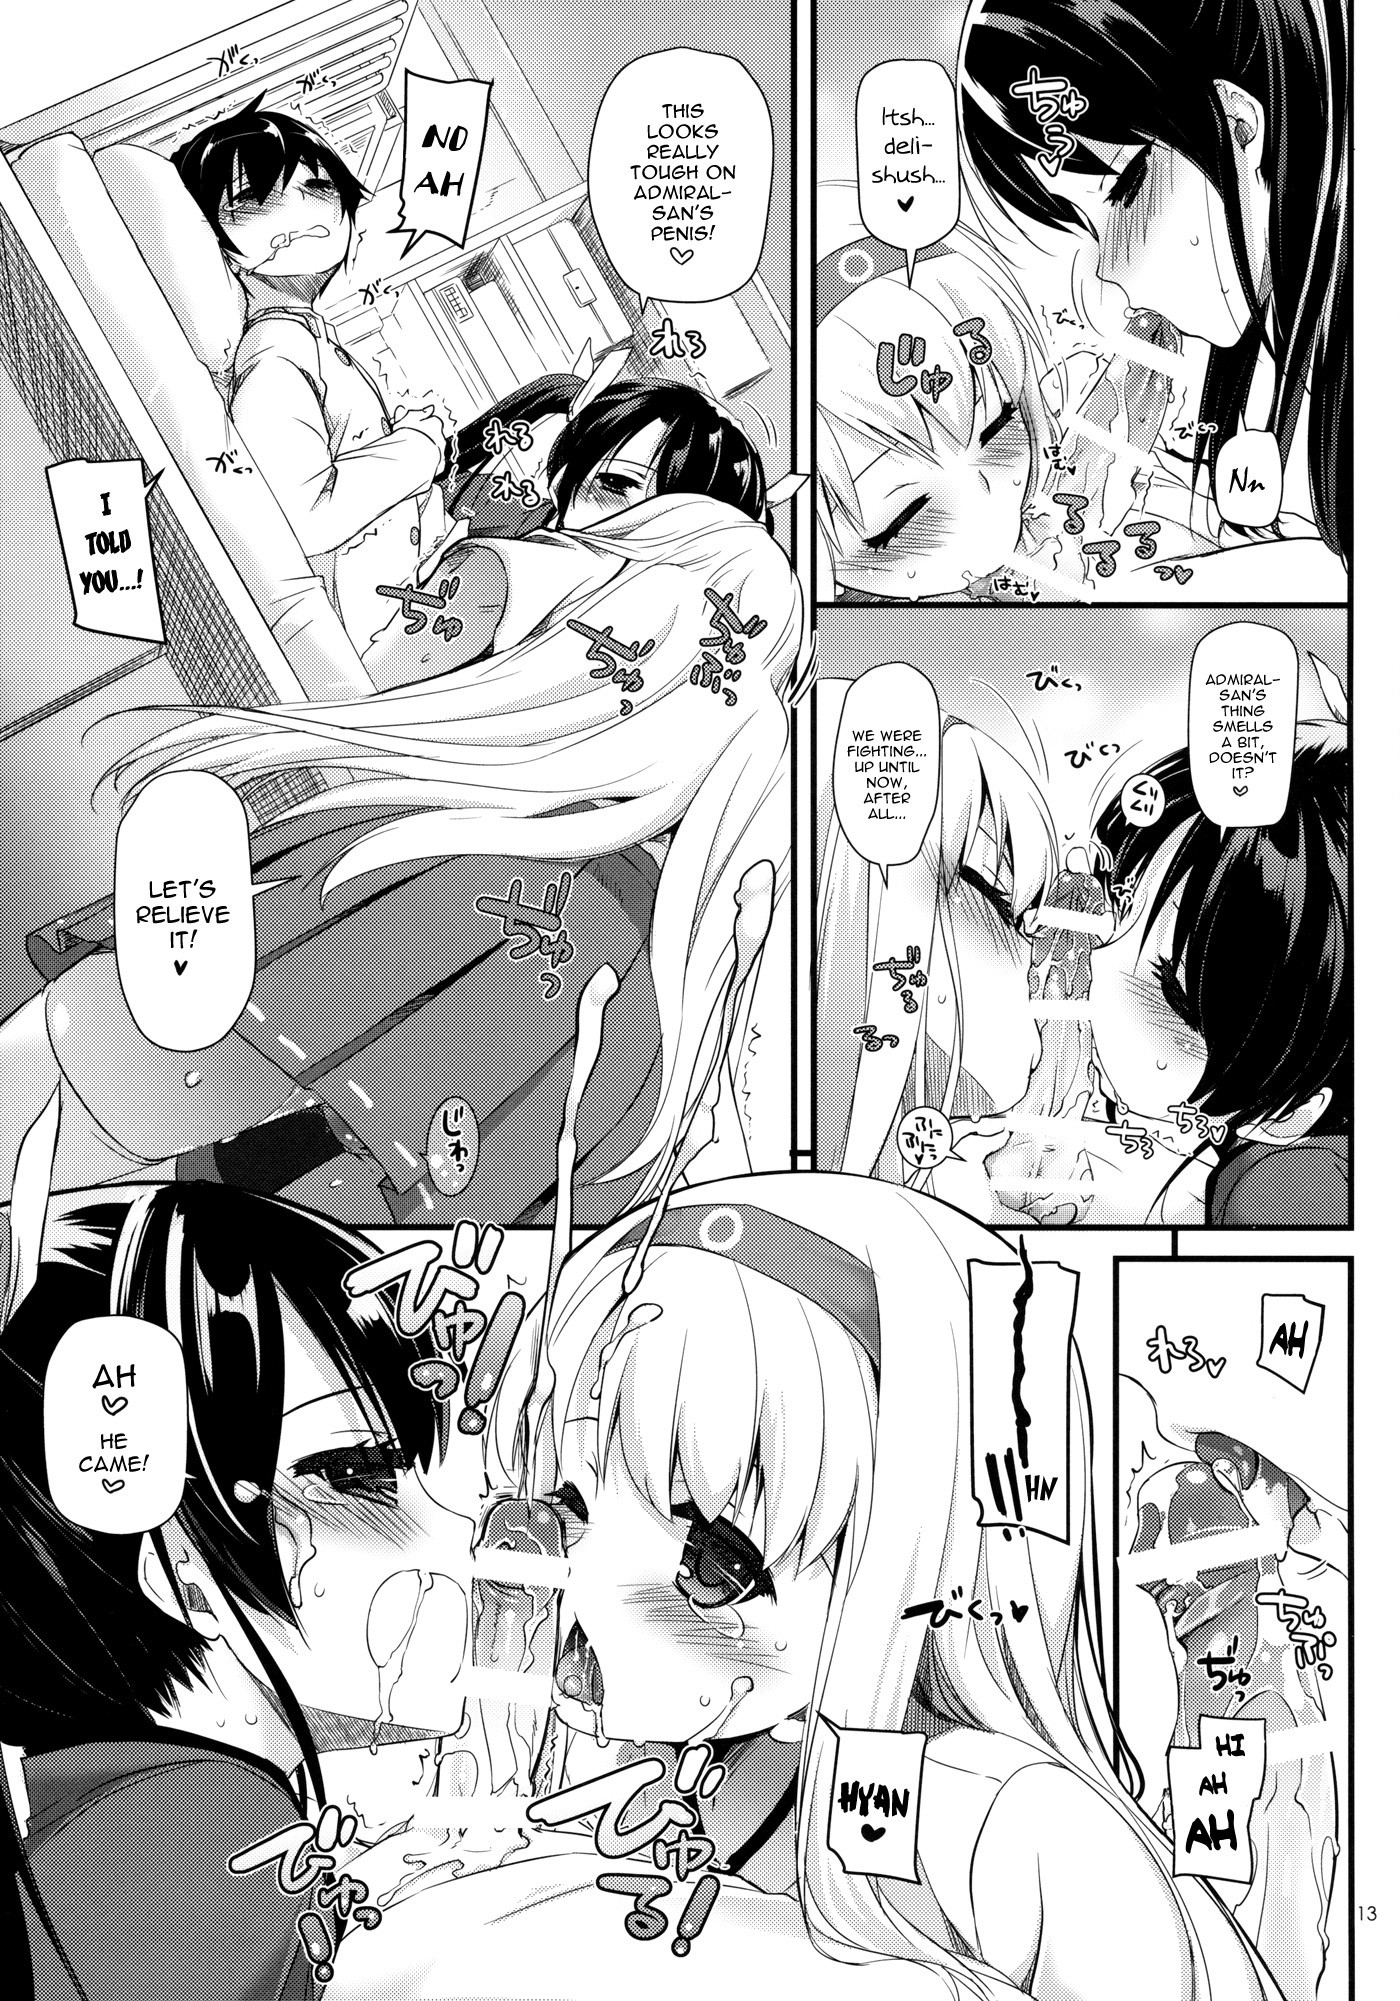 D.L. action 84 hentai manga picture 12